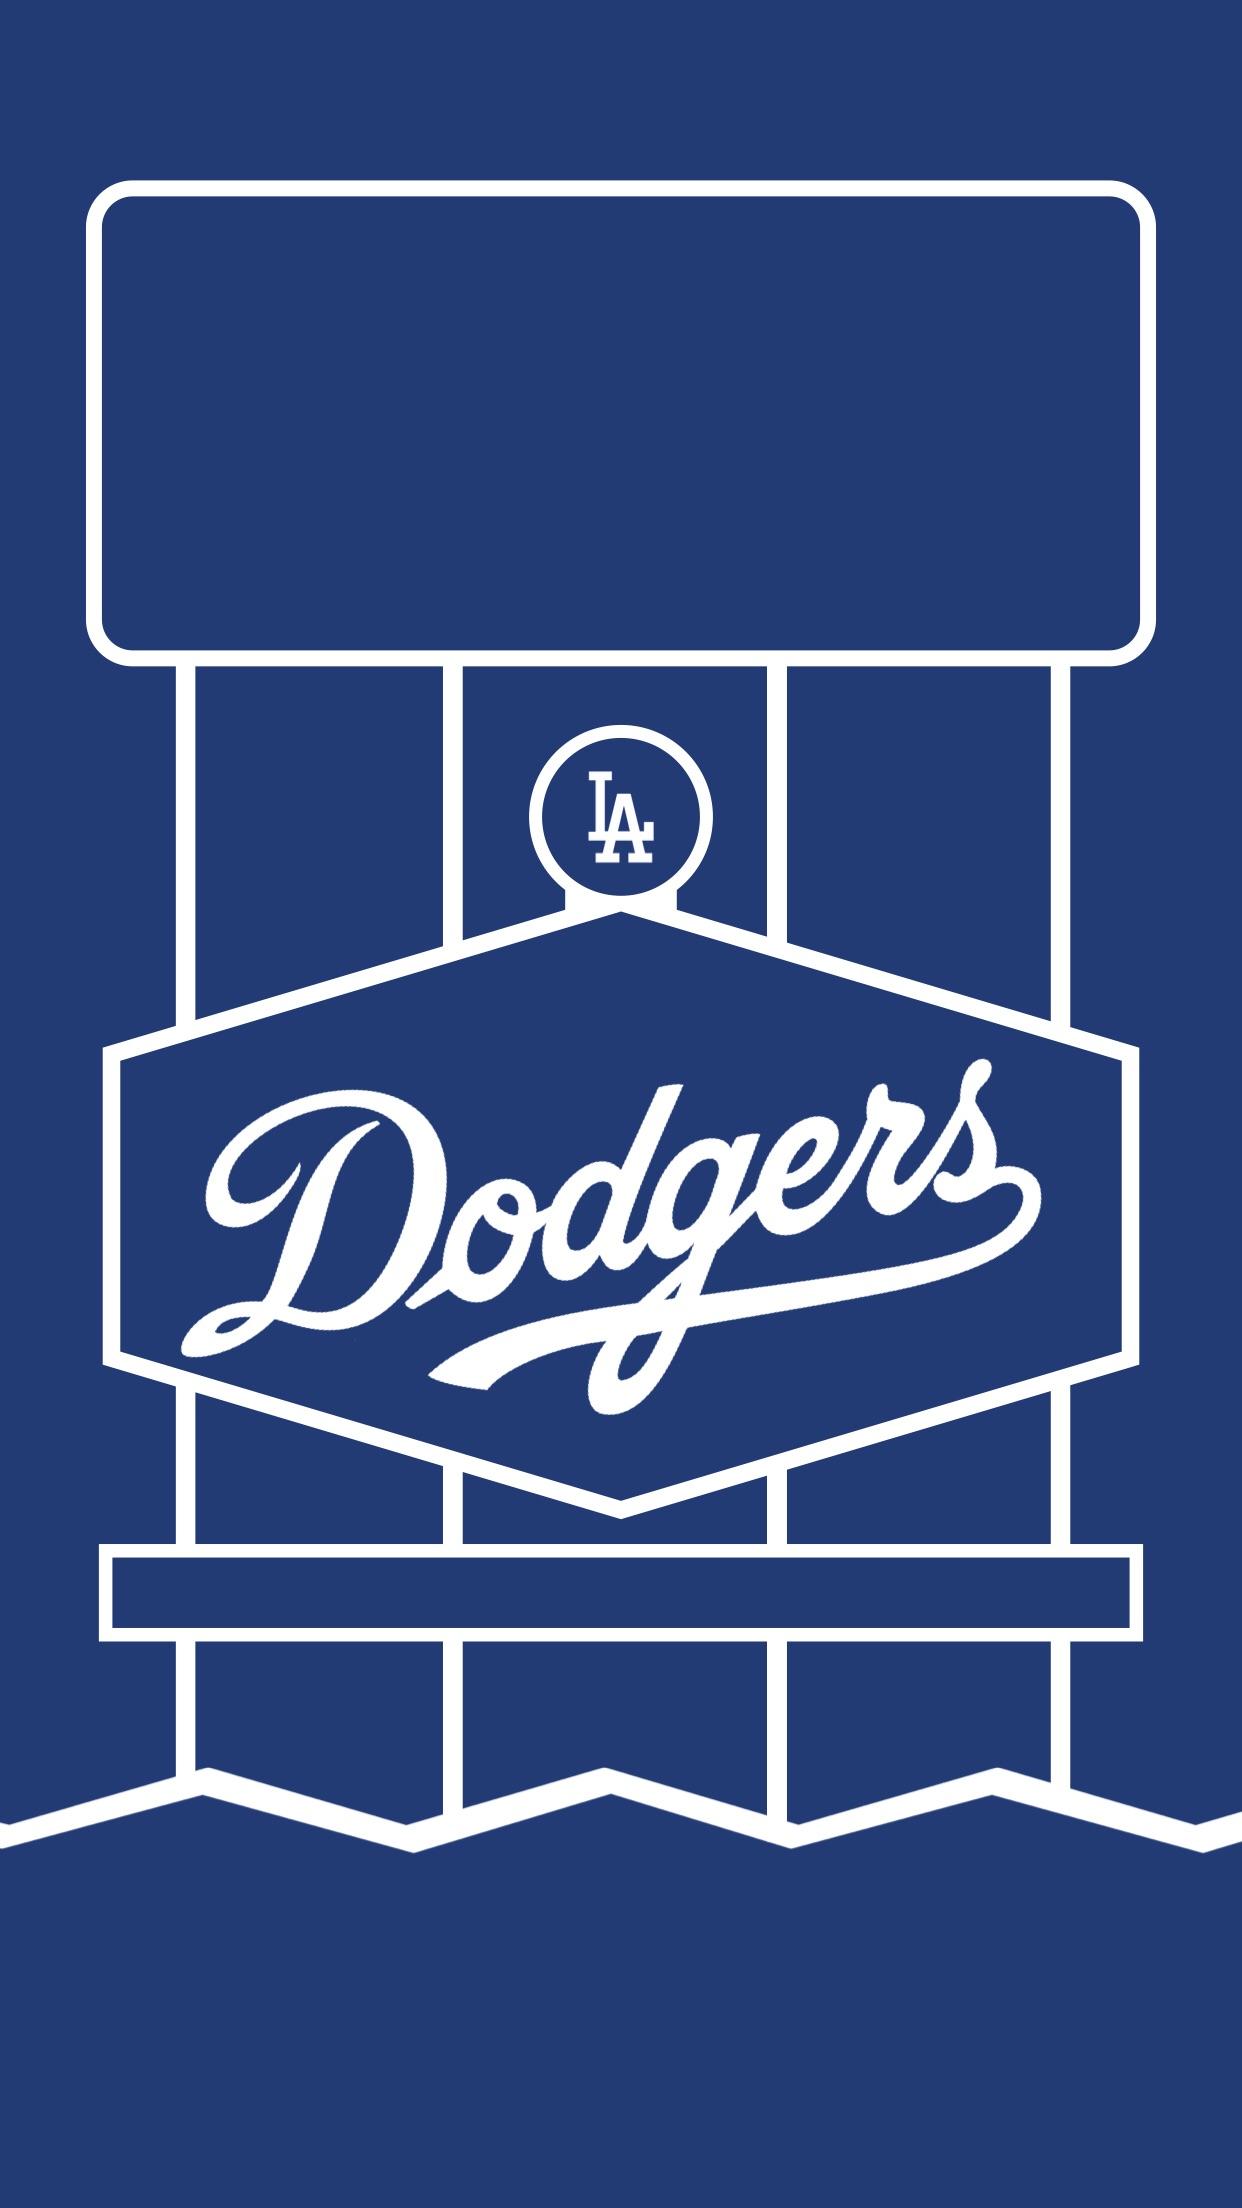 minimal dodger iPhone wallpaper I made! The time and date fit perfectly in the lights rectangle